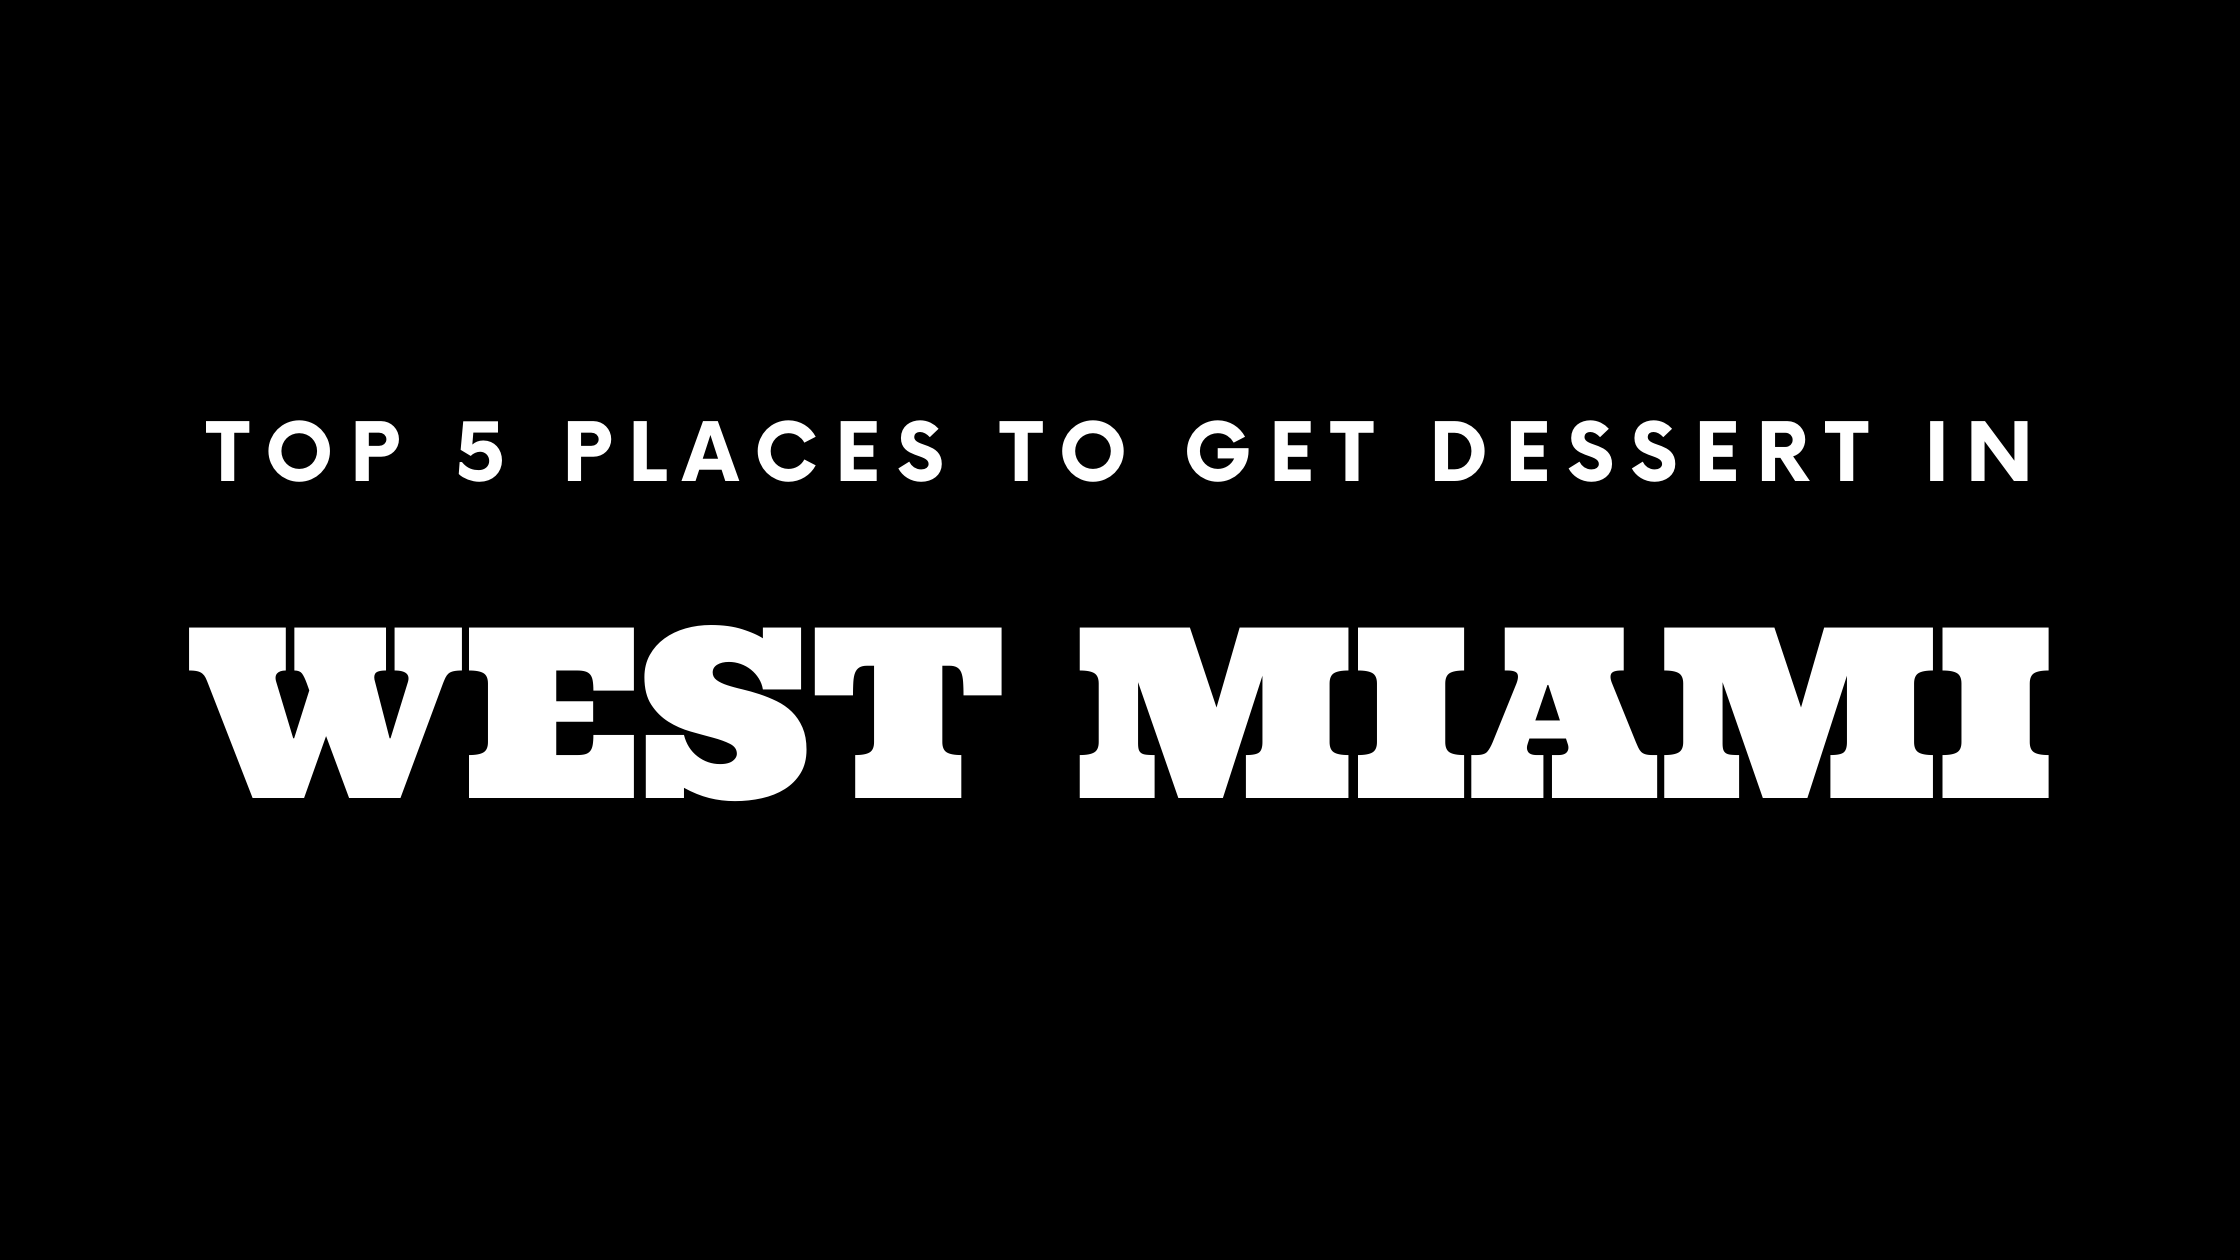 Top 5 Places to Get Dessert in West Miami